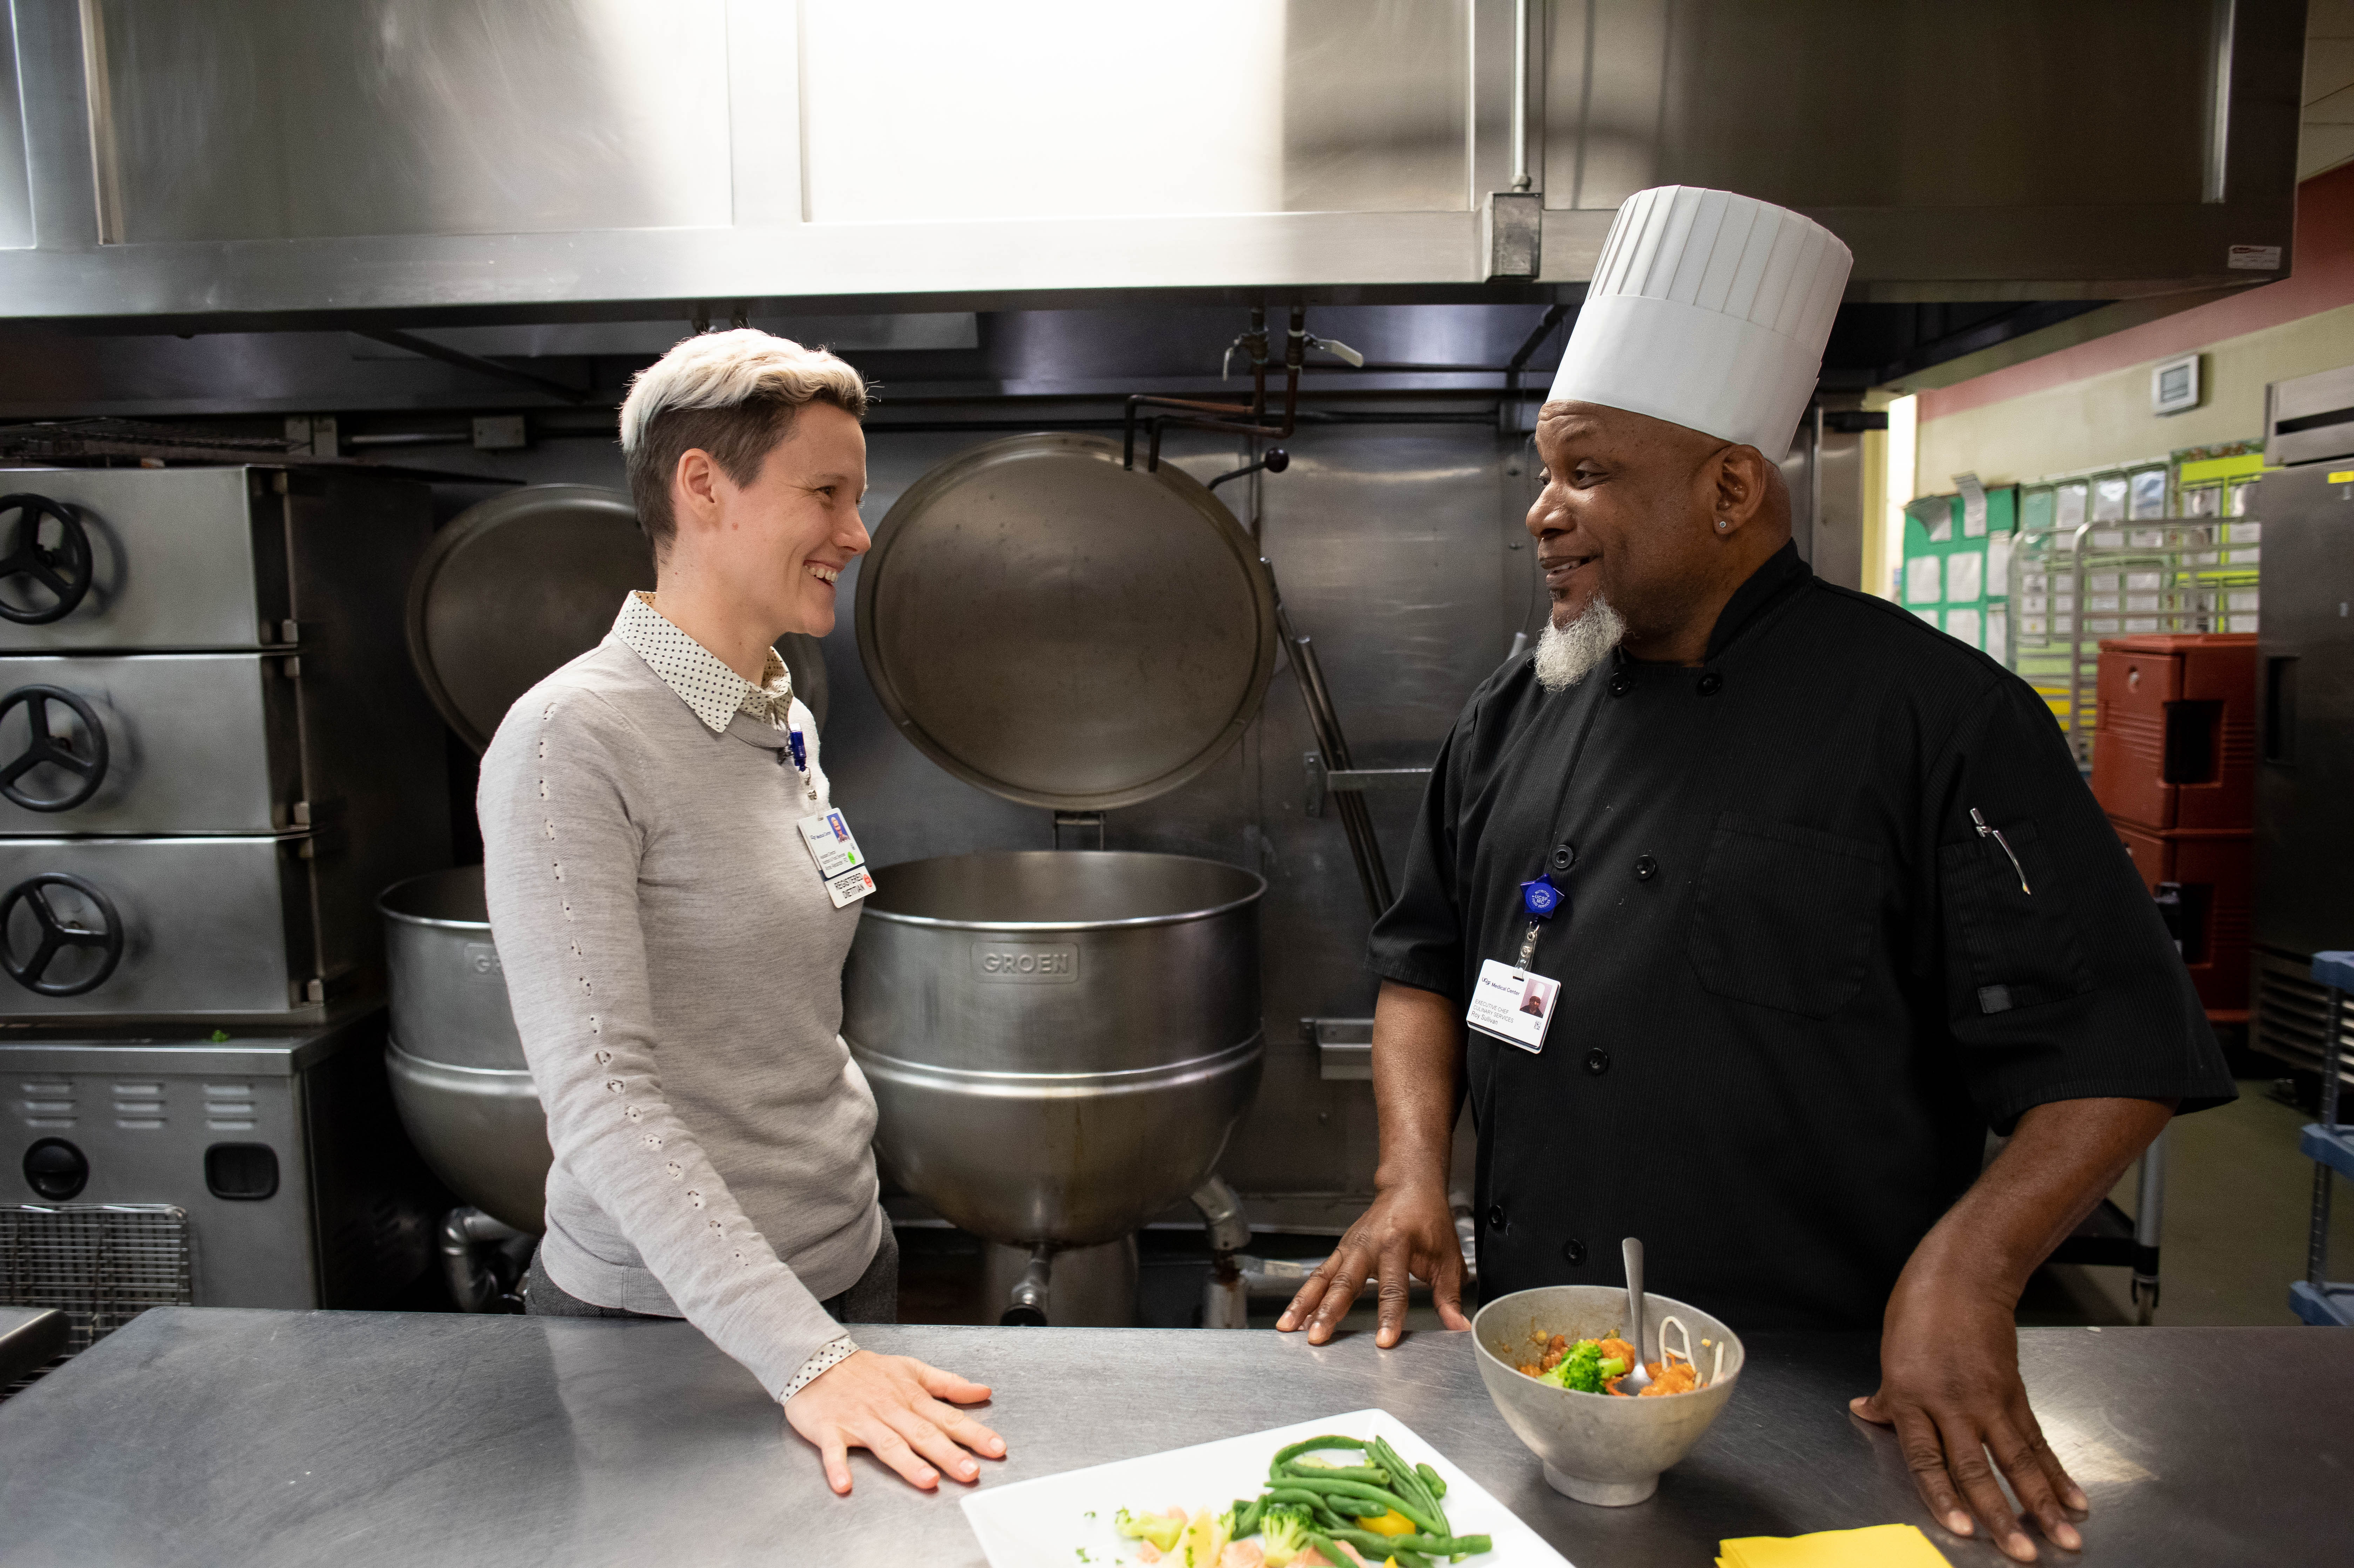 Nutrition and Food Services employees talking in a kitchen